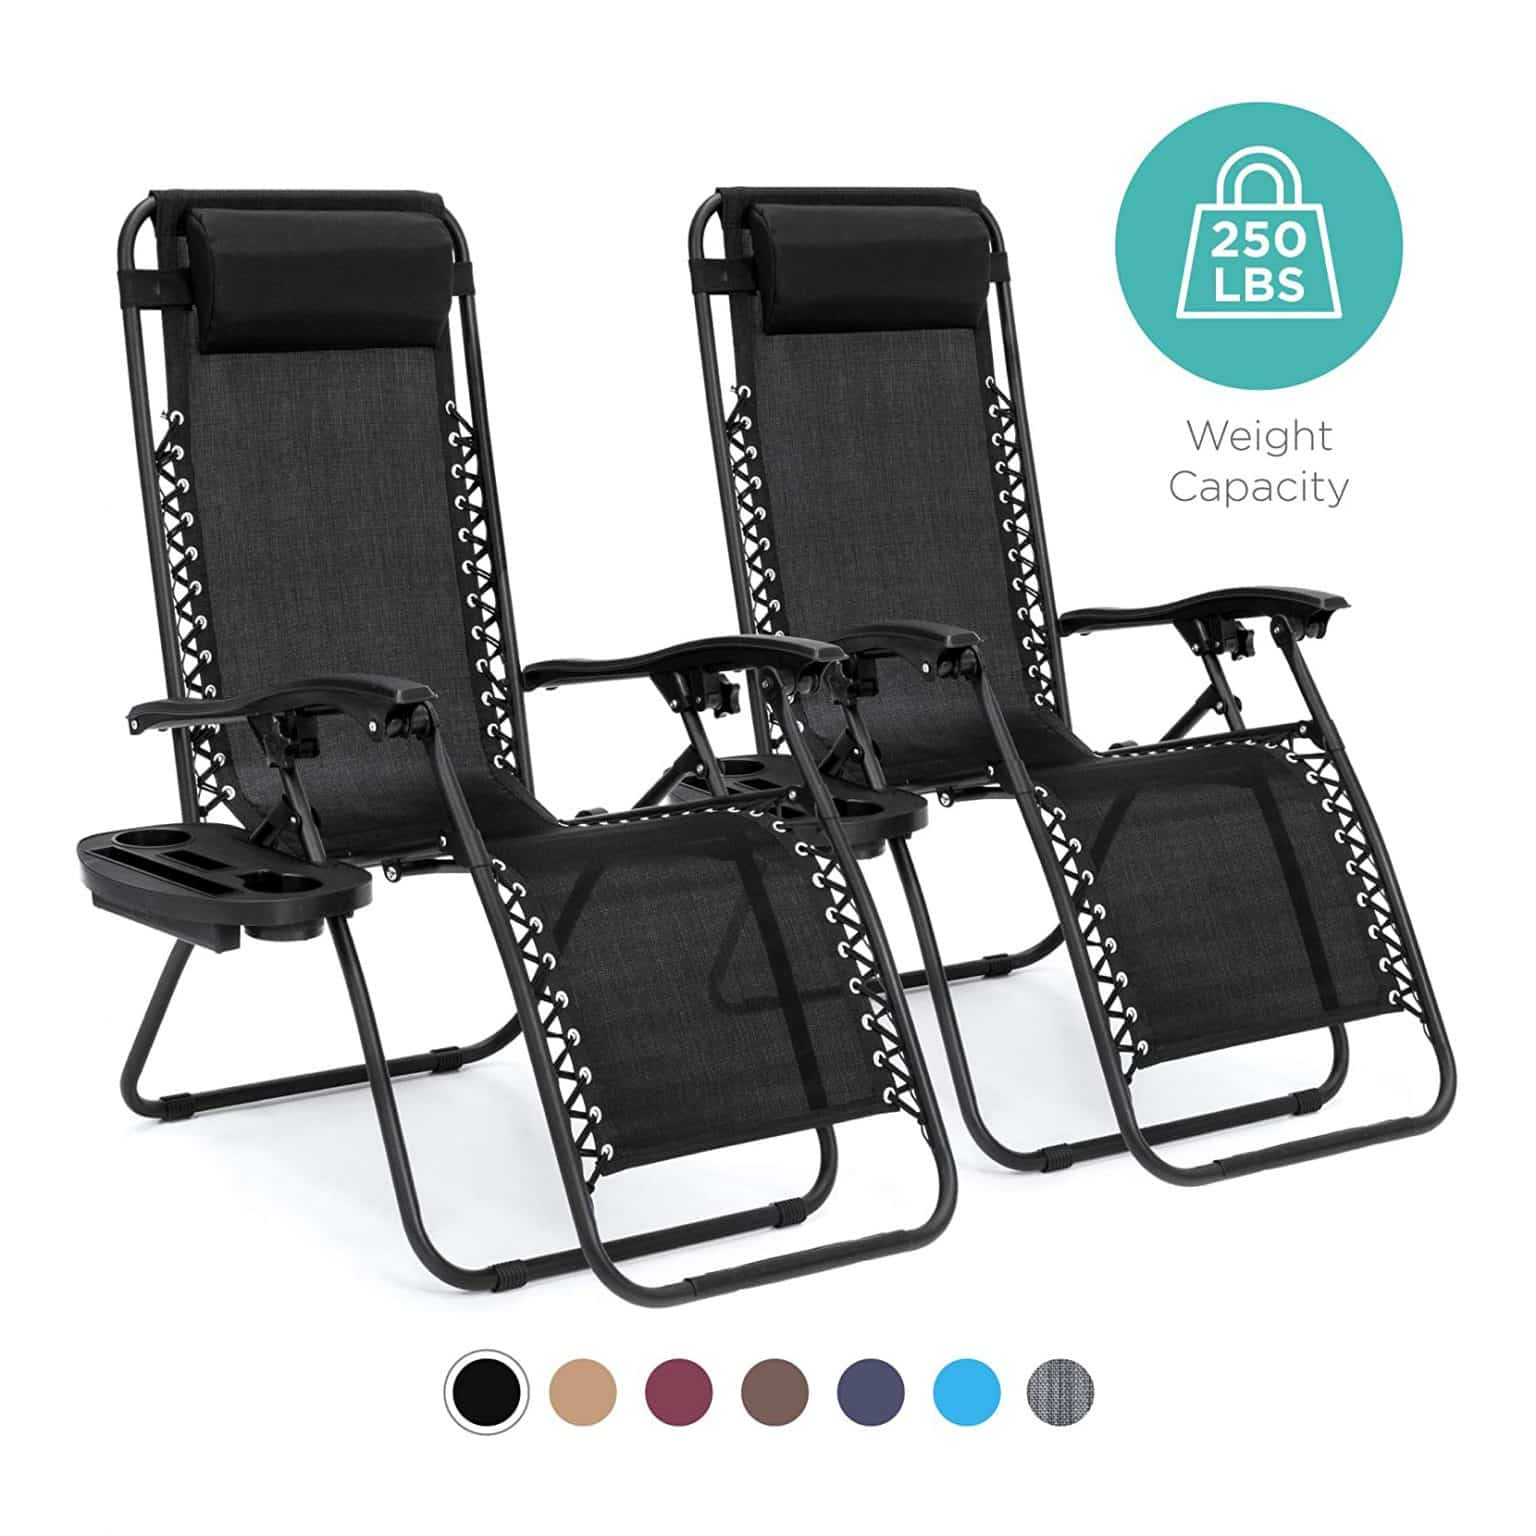 Top 10 Best Zero Gravity Chairs in 2022 Reviews - Show Guide Me